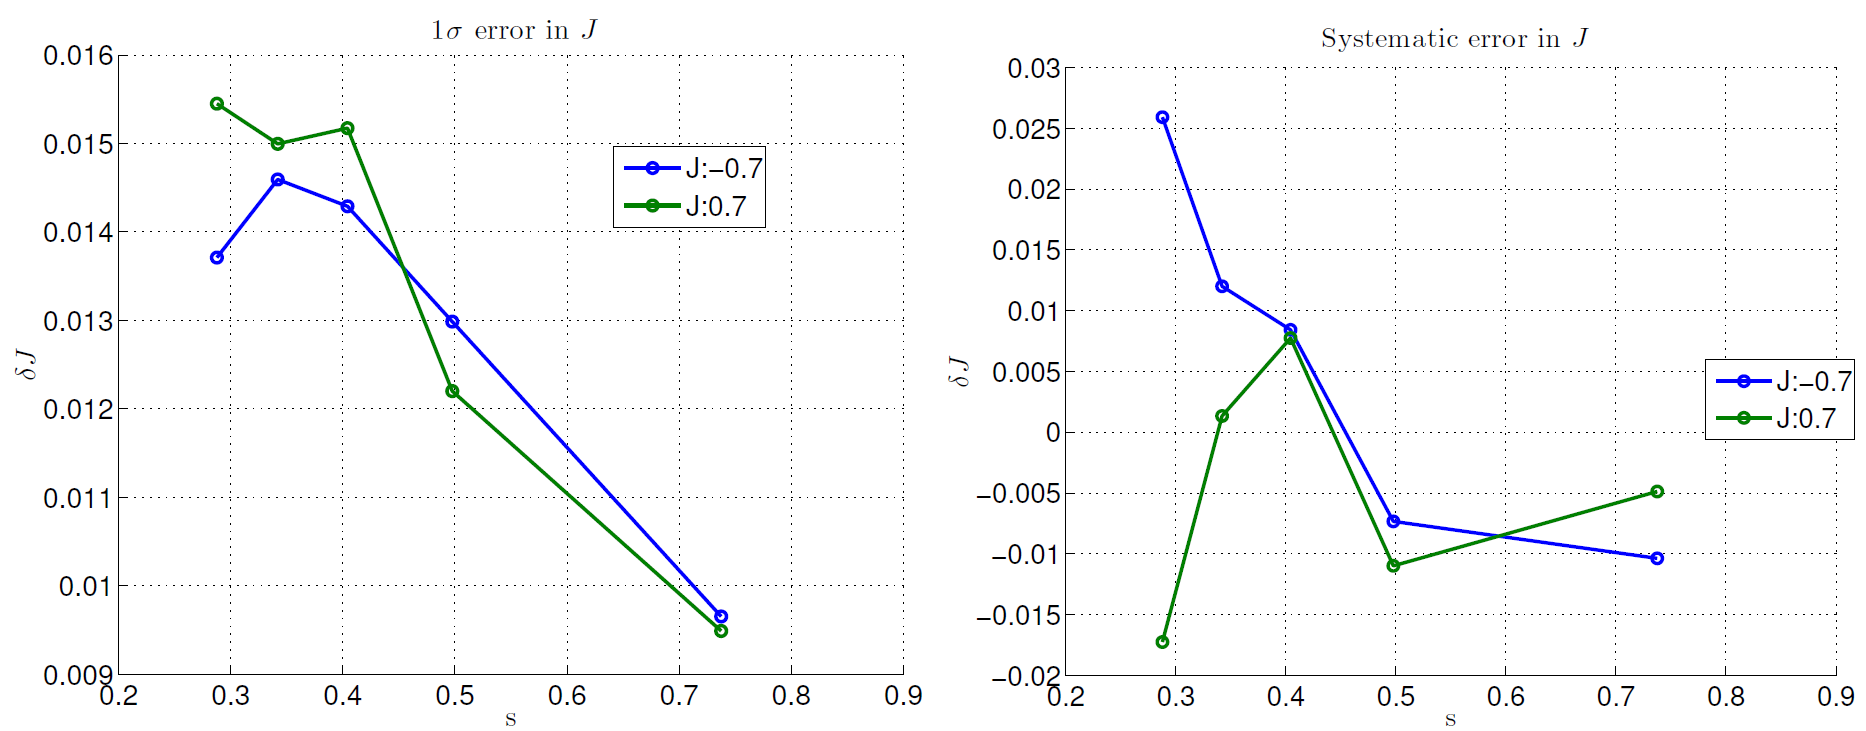 Two graphs showing delta J distributions estimated from best fit parameters to a thermal model. The left graph shows the standard deviation of delta J distributions at different points in the anneal schedule for two different values of J. Along its horizontal axis is s (normalized annealing time) from 0.2 to 0.9 in increments of 0.1. Along its vertical axis is delta J from 0.009 to 0.016 in increments of 0.001. Two lines are plotted in the graph representing J=-0.7 and J=0.7. Both start at approximately s=.275 and end at approximately s=0.75. The line representing J=-0.7 begins approximately at delta J = 0.0135 and after arching up to about delta J = 0.0145 at s=0.35, slopes sharply down to the right to about delta J = 0.0095. The line representing J=0.7 begins approximately at delta J = 0.0155 and ends up close to the other line by the end. The right graph shows the mean values. Along its horizontal axis is s (normalized annealing time) from 0.2 to 0.9 in increments of 0.1. Along its vertical axis is delta J from -0.02 to 0.03 in increments of 0.005. Two lines are plotted in the graph representing J=-0.7 and J=0.7. Both start at approximately s=.275 and end at approximately s=0.75. The line representing J=-0.7 begins approximately at delta J = 0.025 near the upper right of the chart and slopes down to end at approximately delta J = -0.01. In contrast, the line representing J=0.7 starts at approximately delta J = -0.175 in the lower left of the chart and ends at approximately delta J = -0.005.